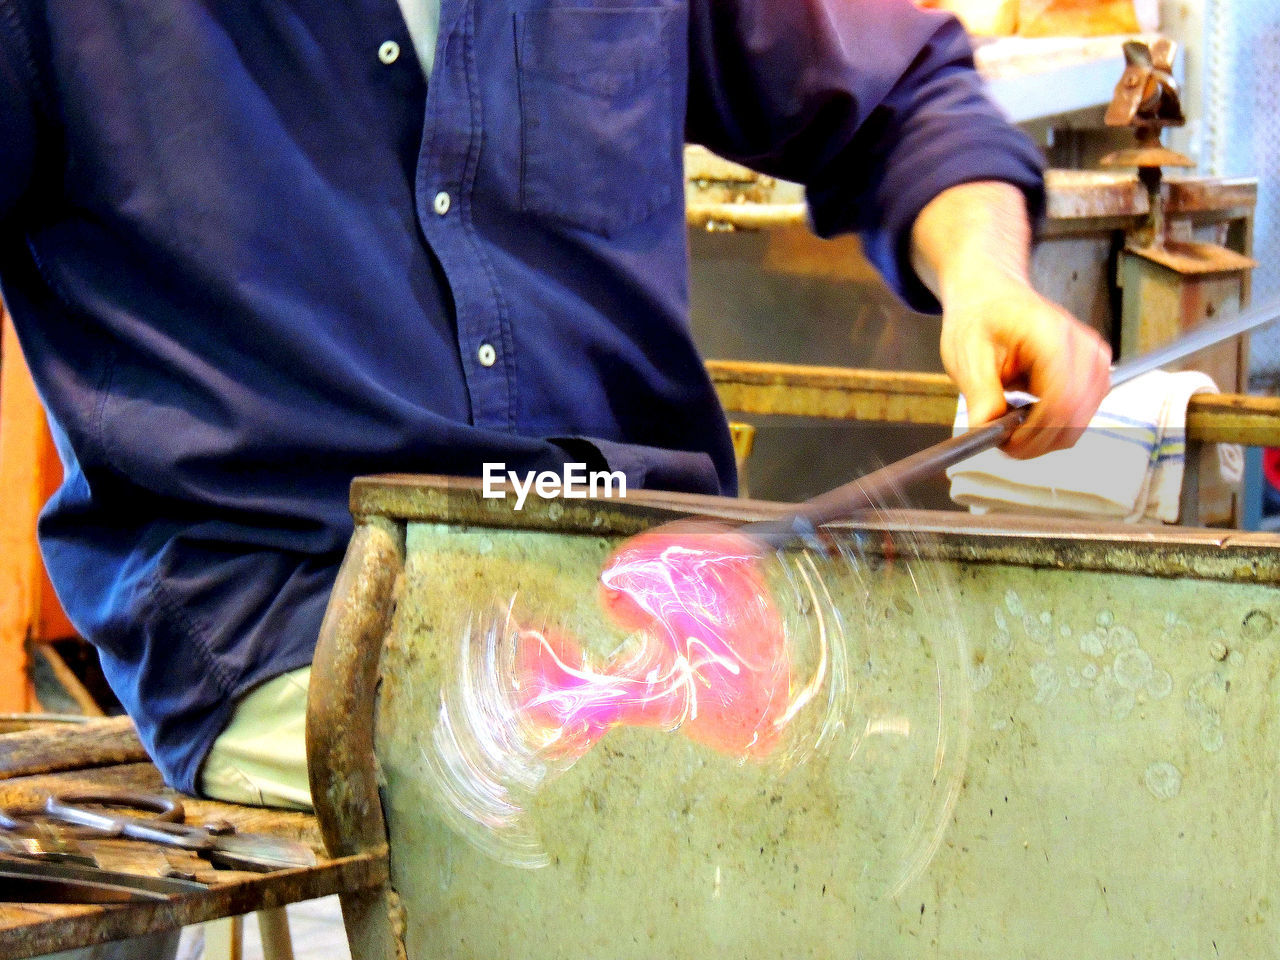 Midsection of worker spinning glass blower at factory